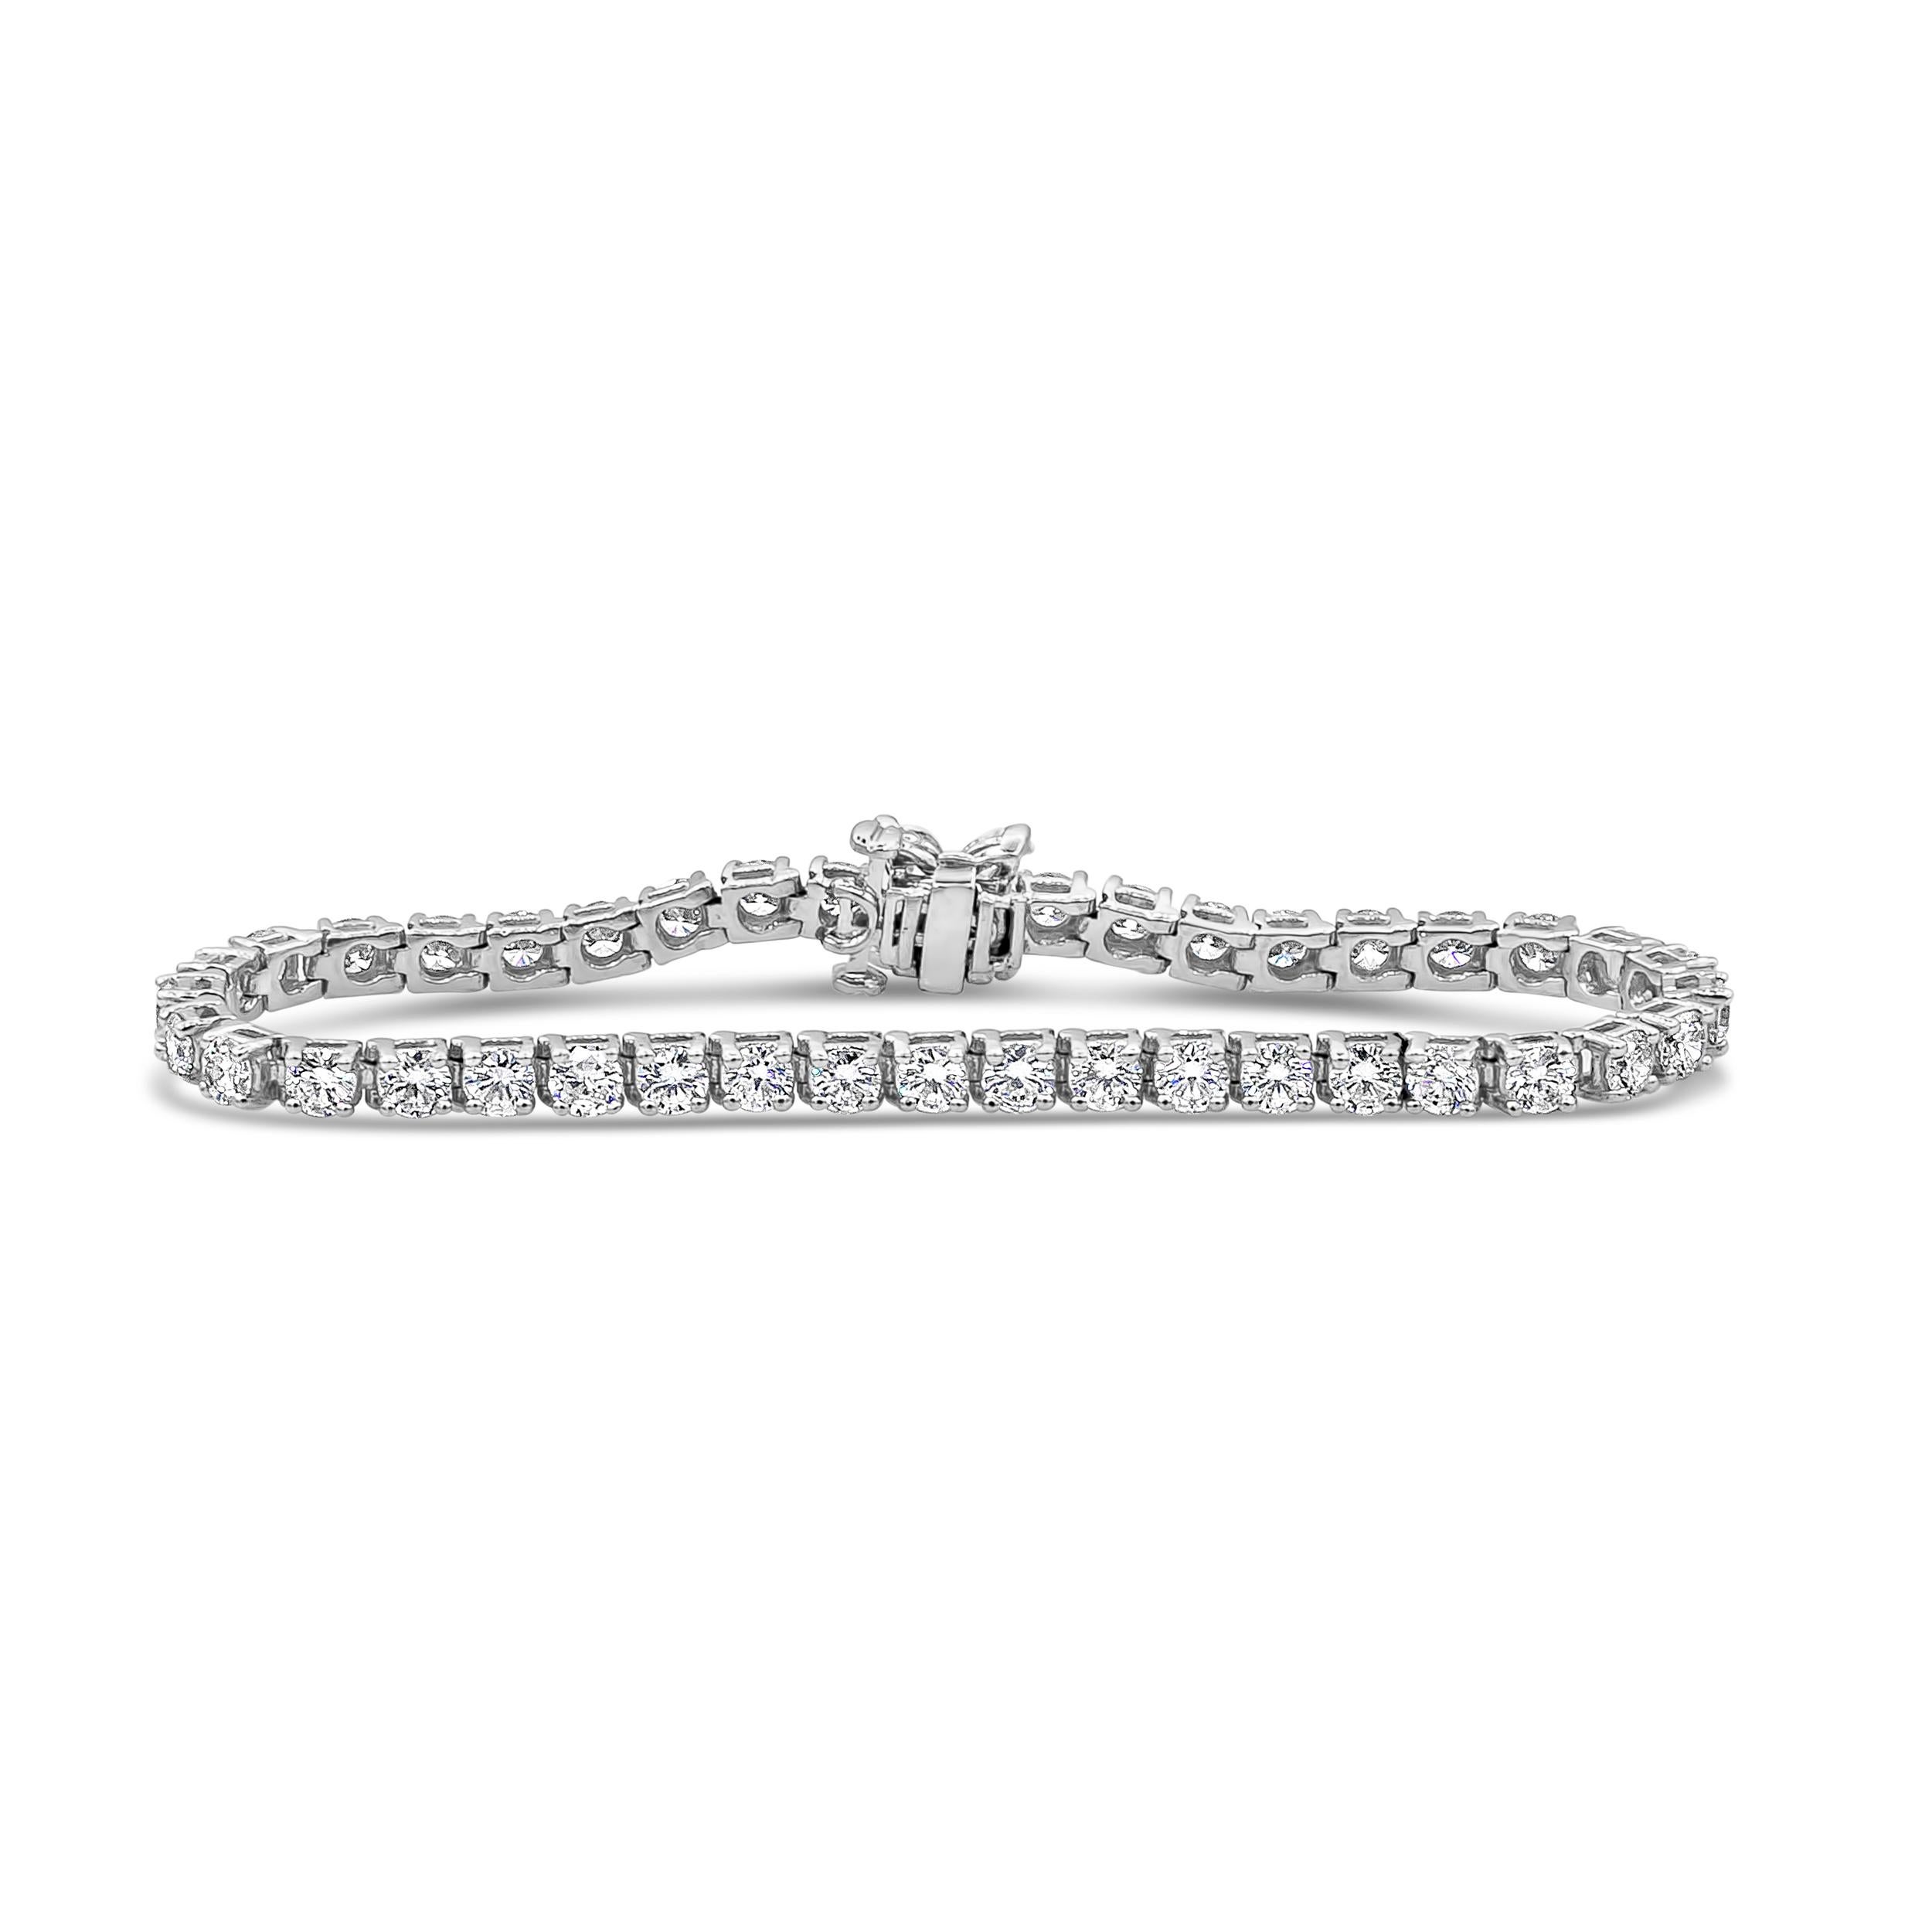 A classy and simple tennis bracelet showcasing a row of 39 pieces of round brilliant diamonds weighing 7.80 carats total, F-G color, VS-SI in clarity. Finished with a flower-motif design made of 4 pieces of marquise cut diamonds on the clasp